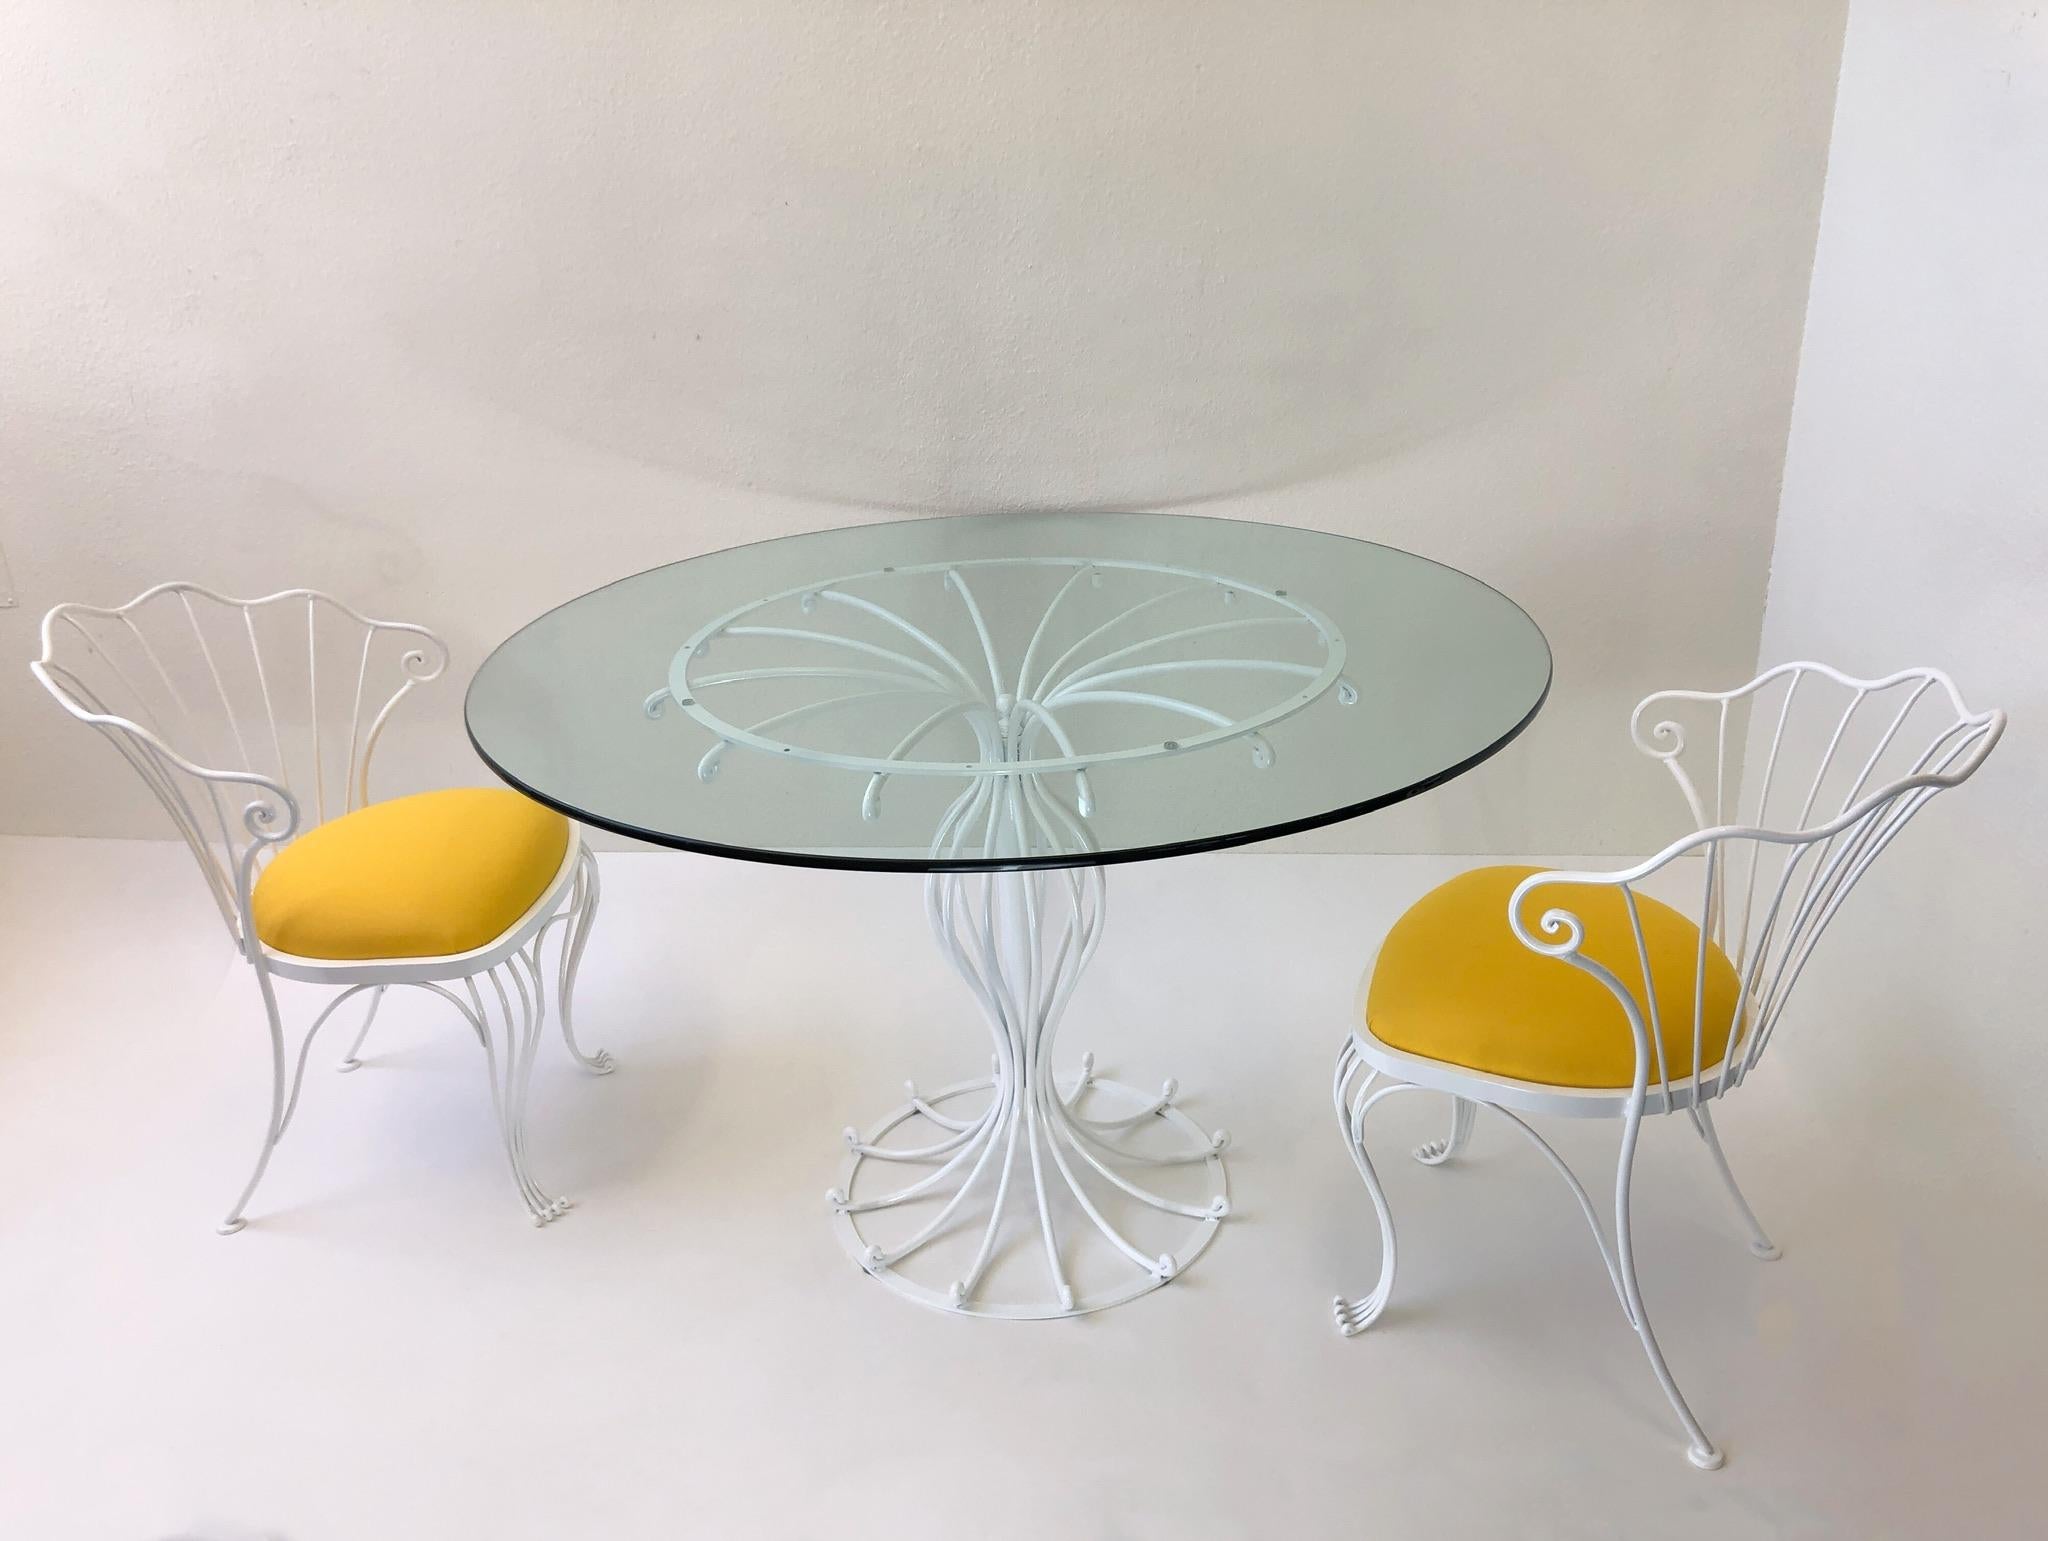 A glamorous powder coated white wrought iron and yellow sunbrella patio set designed by Russell Woodard in the 1970s. The set has been newly powder coated, seats recovered in a yellow sunbrella fabric and a new 1/2 inch thick 48” diameter glass top.